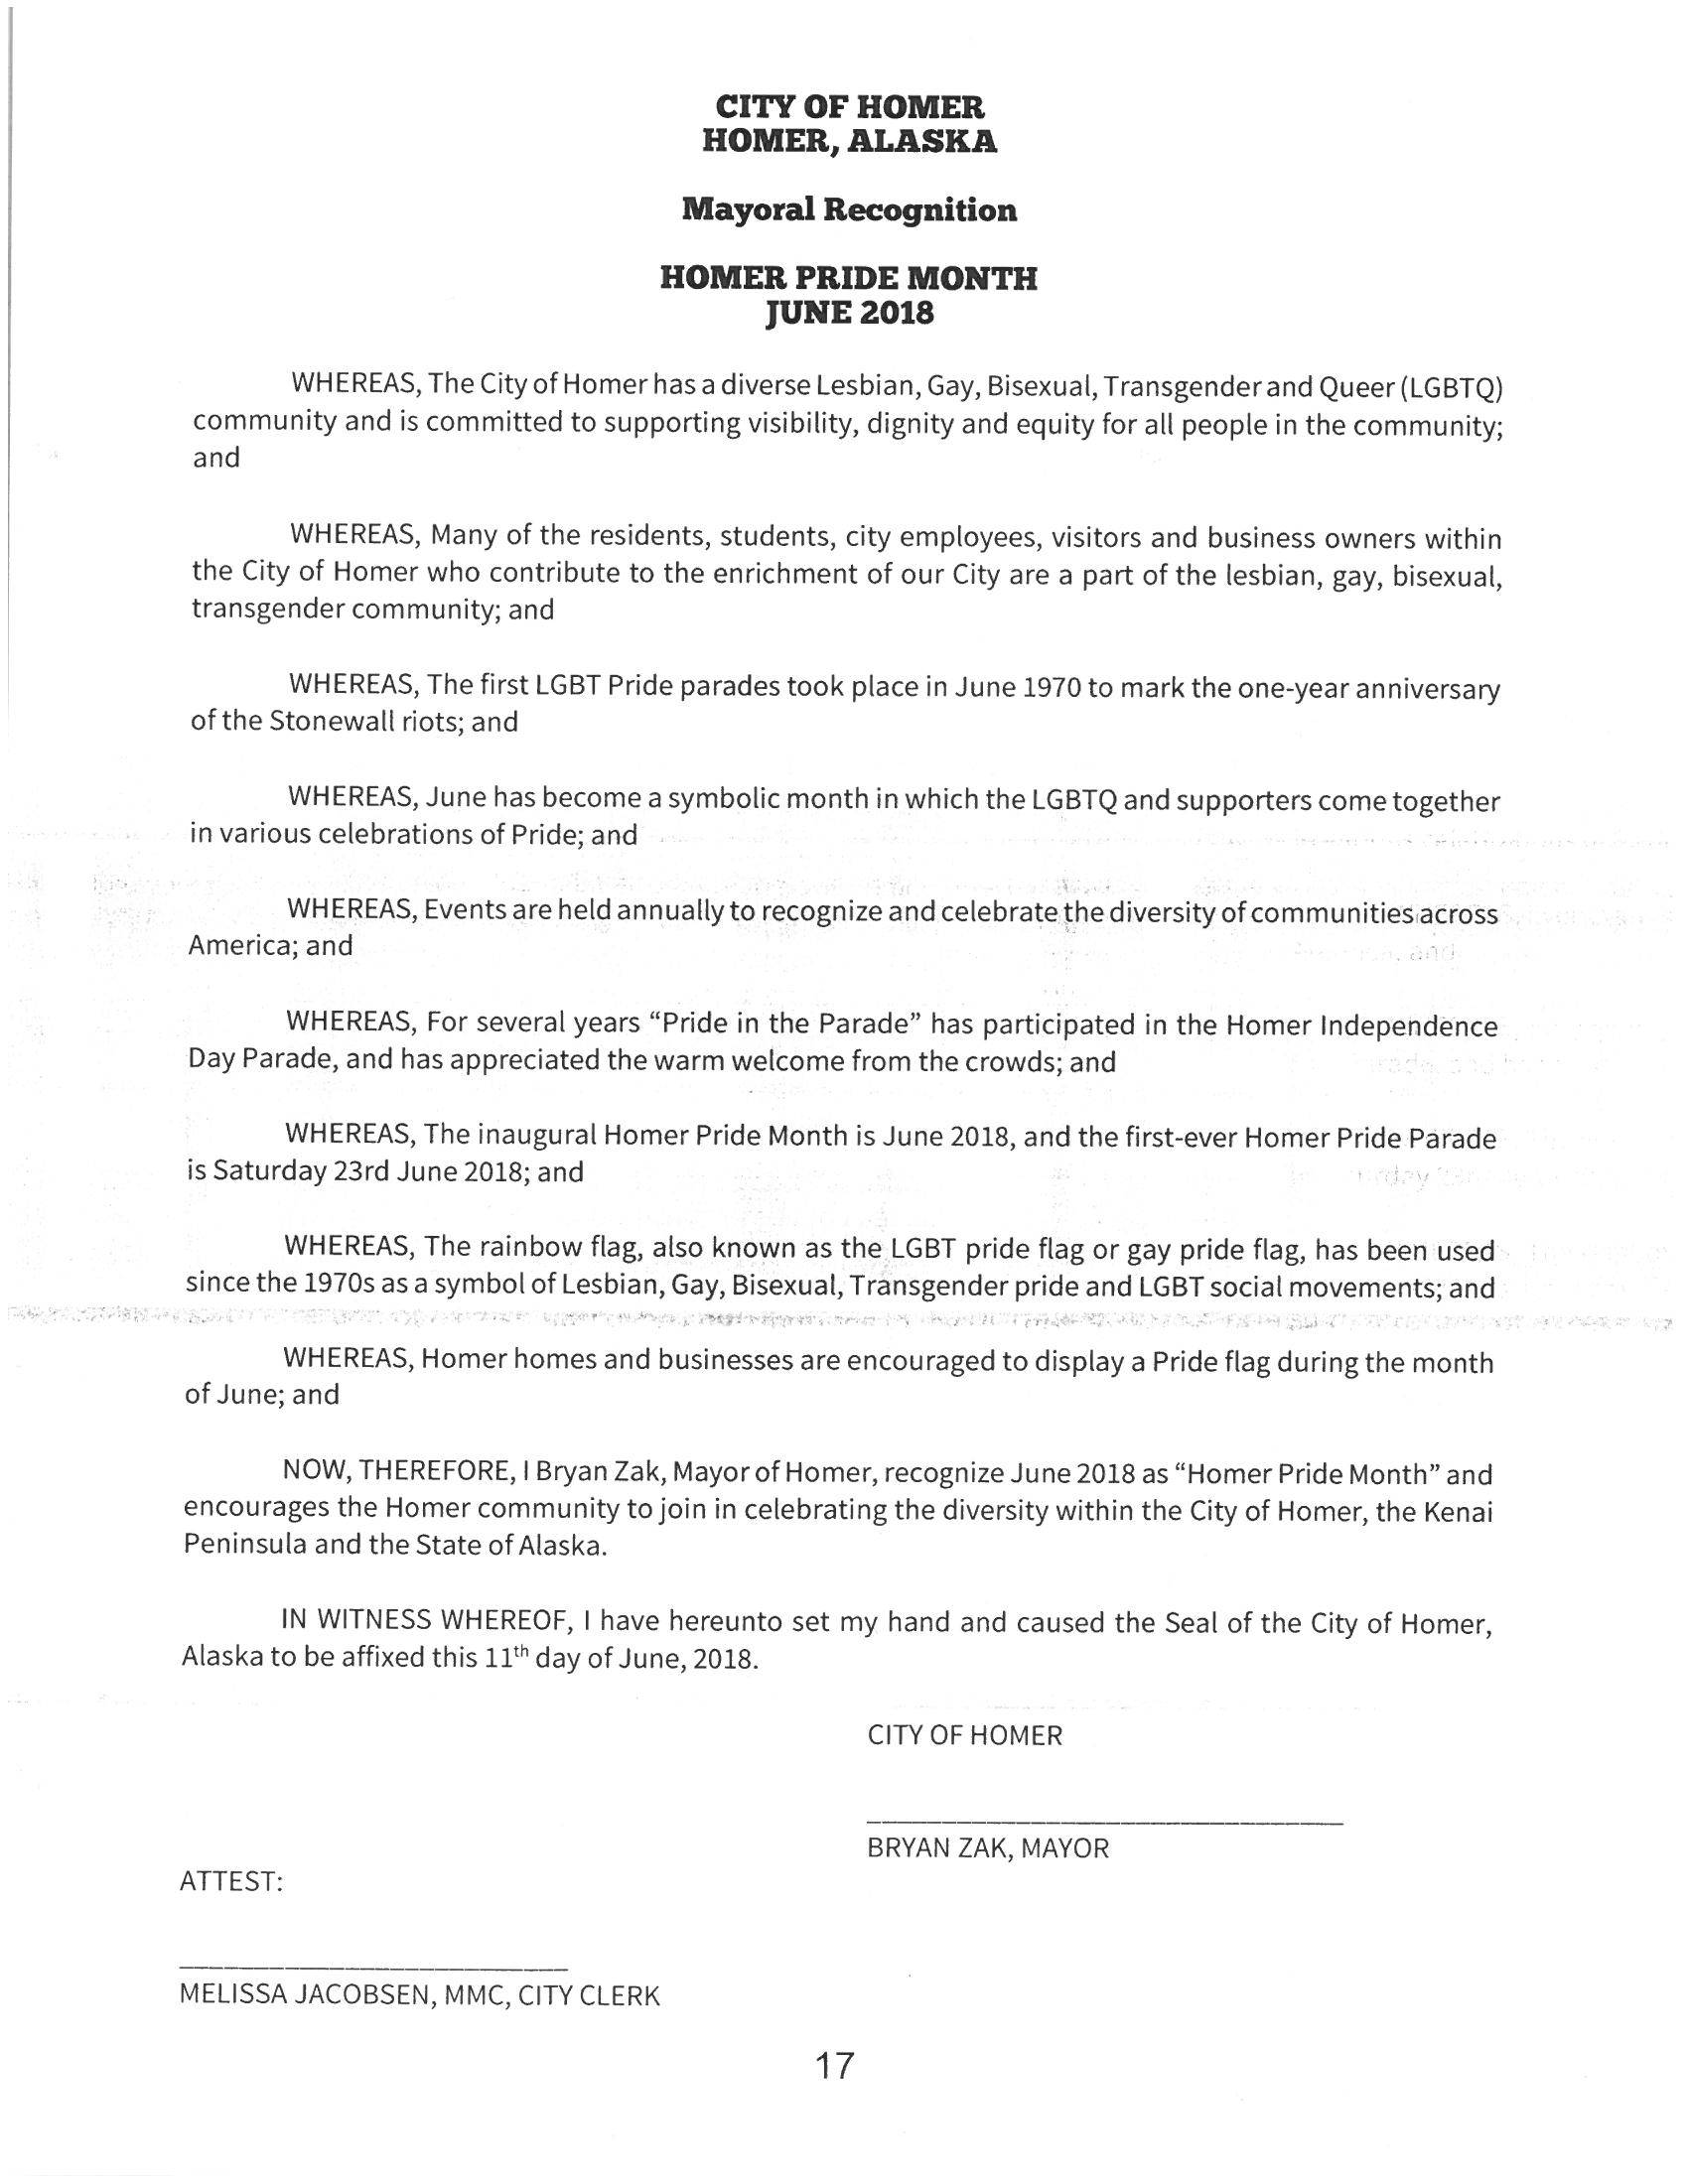 Homer Mayor Bryan Zak's proposed Mayoral Recognition of Homer Pride Month 2018 as it appeared in the council packet of June 11, 2018. Zak edited this version further to delete the references to the Kenai Peninsula and the State of Alaska and that is the version he read at an unofficial presentation on Monday. (Photo provided)